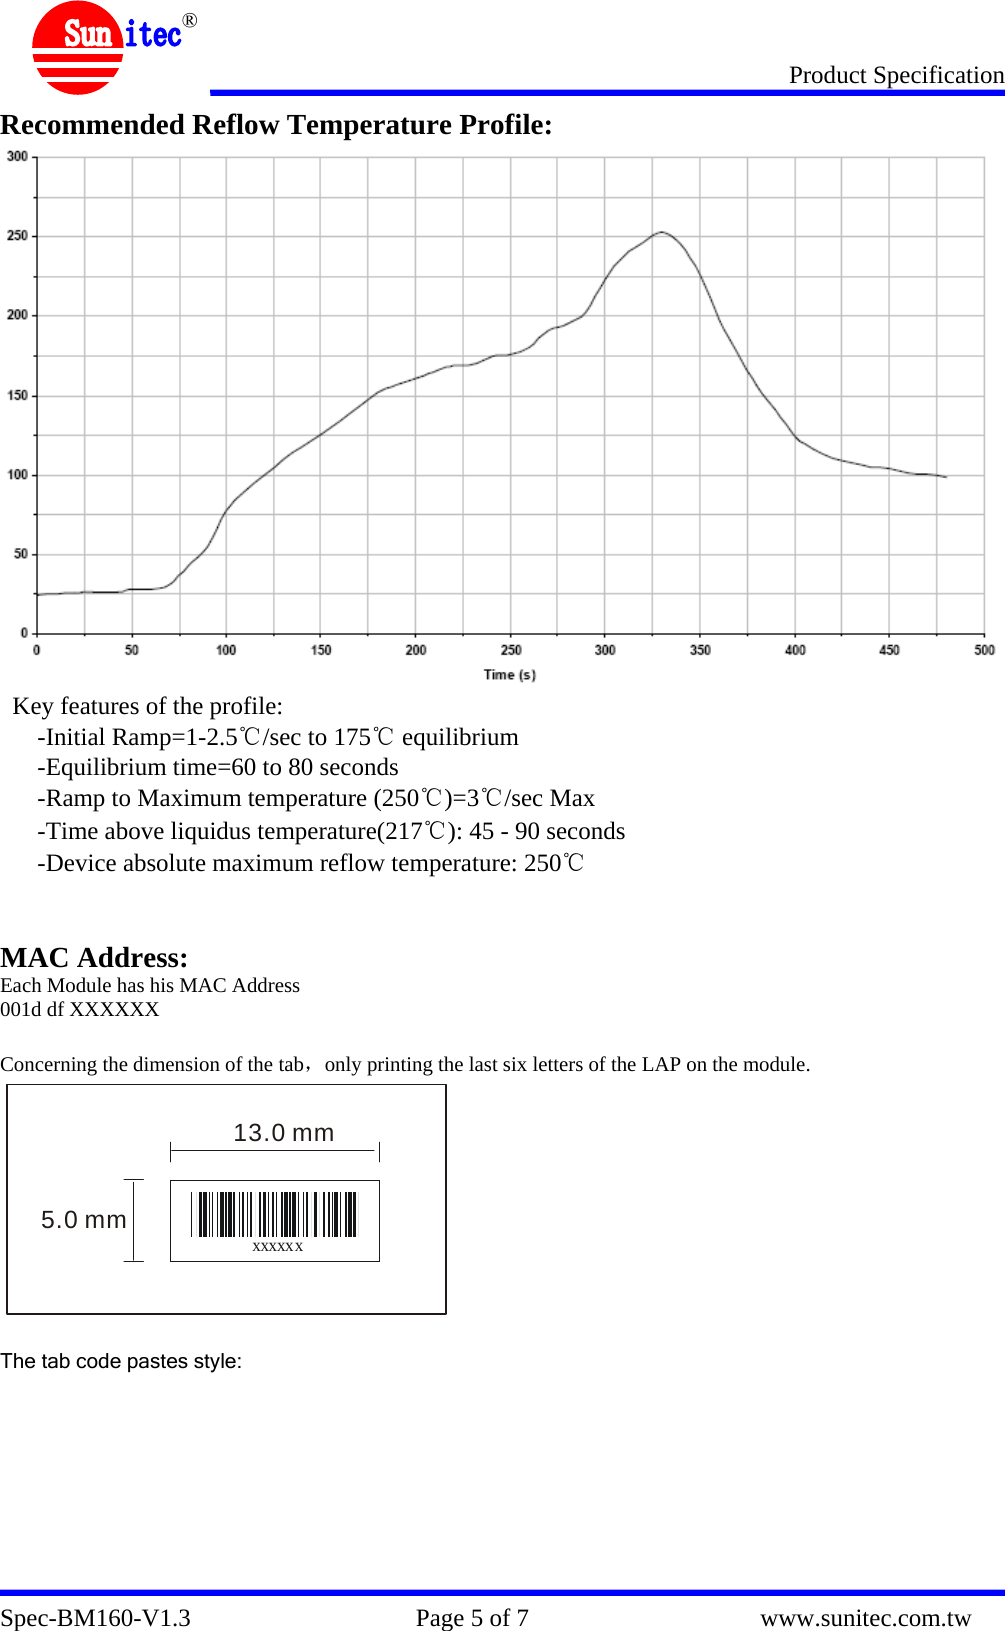 Product Specification Spec-BM160-V1.3                                    Page 5 of 7                                     www.sunitec.com.tw  ® Recommended Reflow Temperature Profile:  Key features of the profile: -Initial Ramp=1-2.5℃/sec to 175℃ equilibrium -Equilibrium time=60 to 80 seconds -Ramp to Maximum temperature (250℃)=3℃/sec Max -Time above liquidus temperature(217℃): 45 - 90 seconds -Device absolute maximum reflow temperature: 250℃   MAC Address: Each Module has his MAC Address 001d df XXXXXX  Concerning the dimension of the tab，only printing the last six letters of the LAP on the module. xxxxxx5.0 mm13.0 mm  The tab code pastes style:          